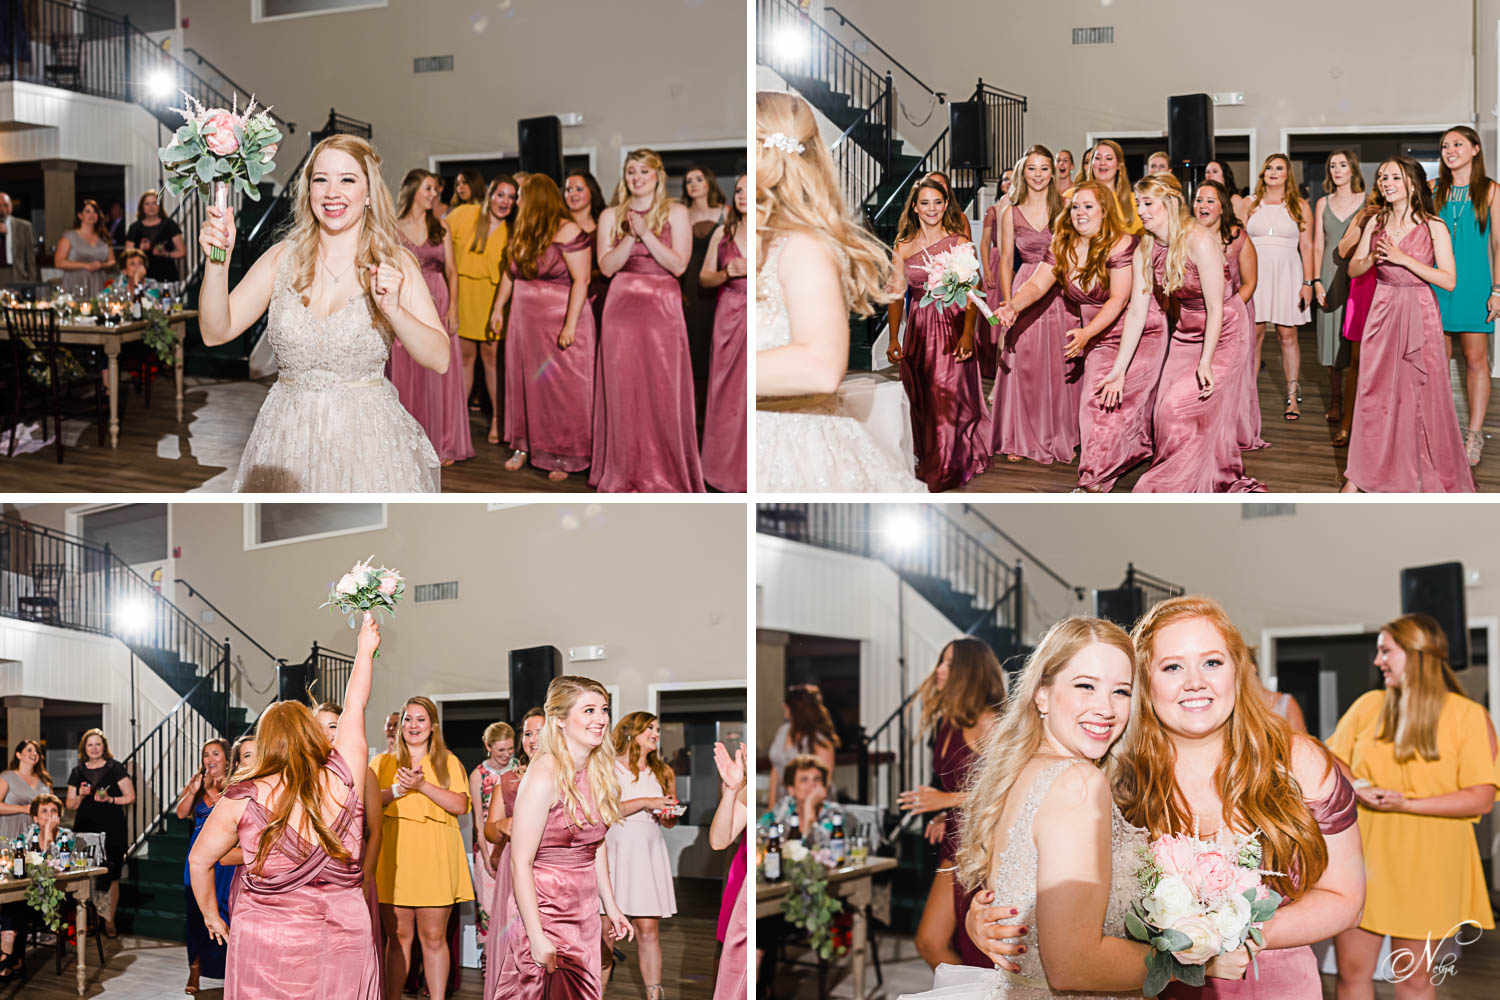 bride throwing her bouquet to her bridesmaids. one bridesmaid catching the bouquet and screaming with joy!